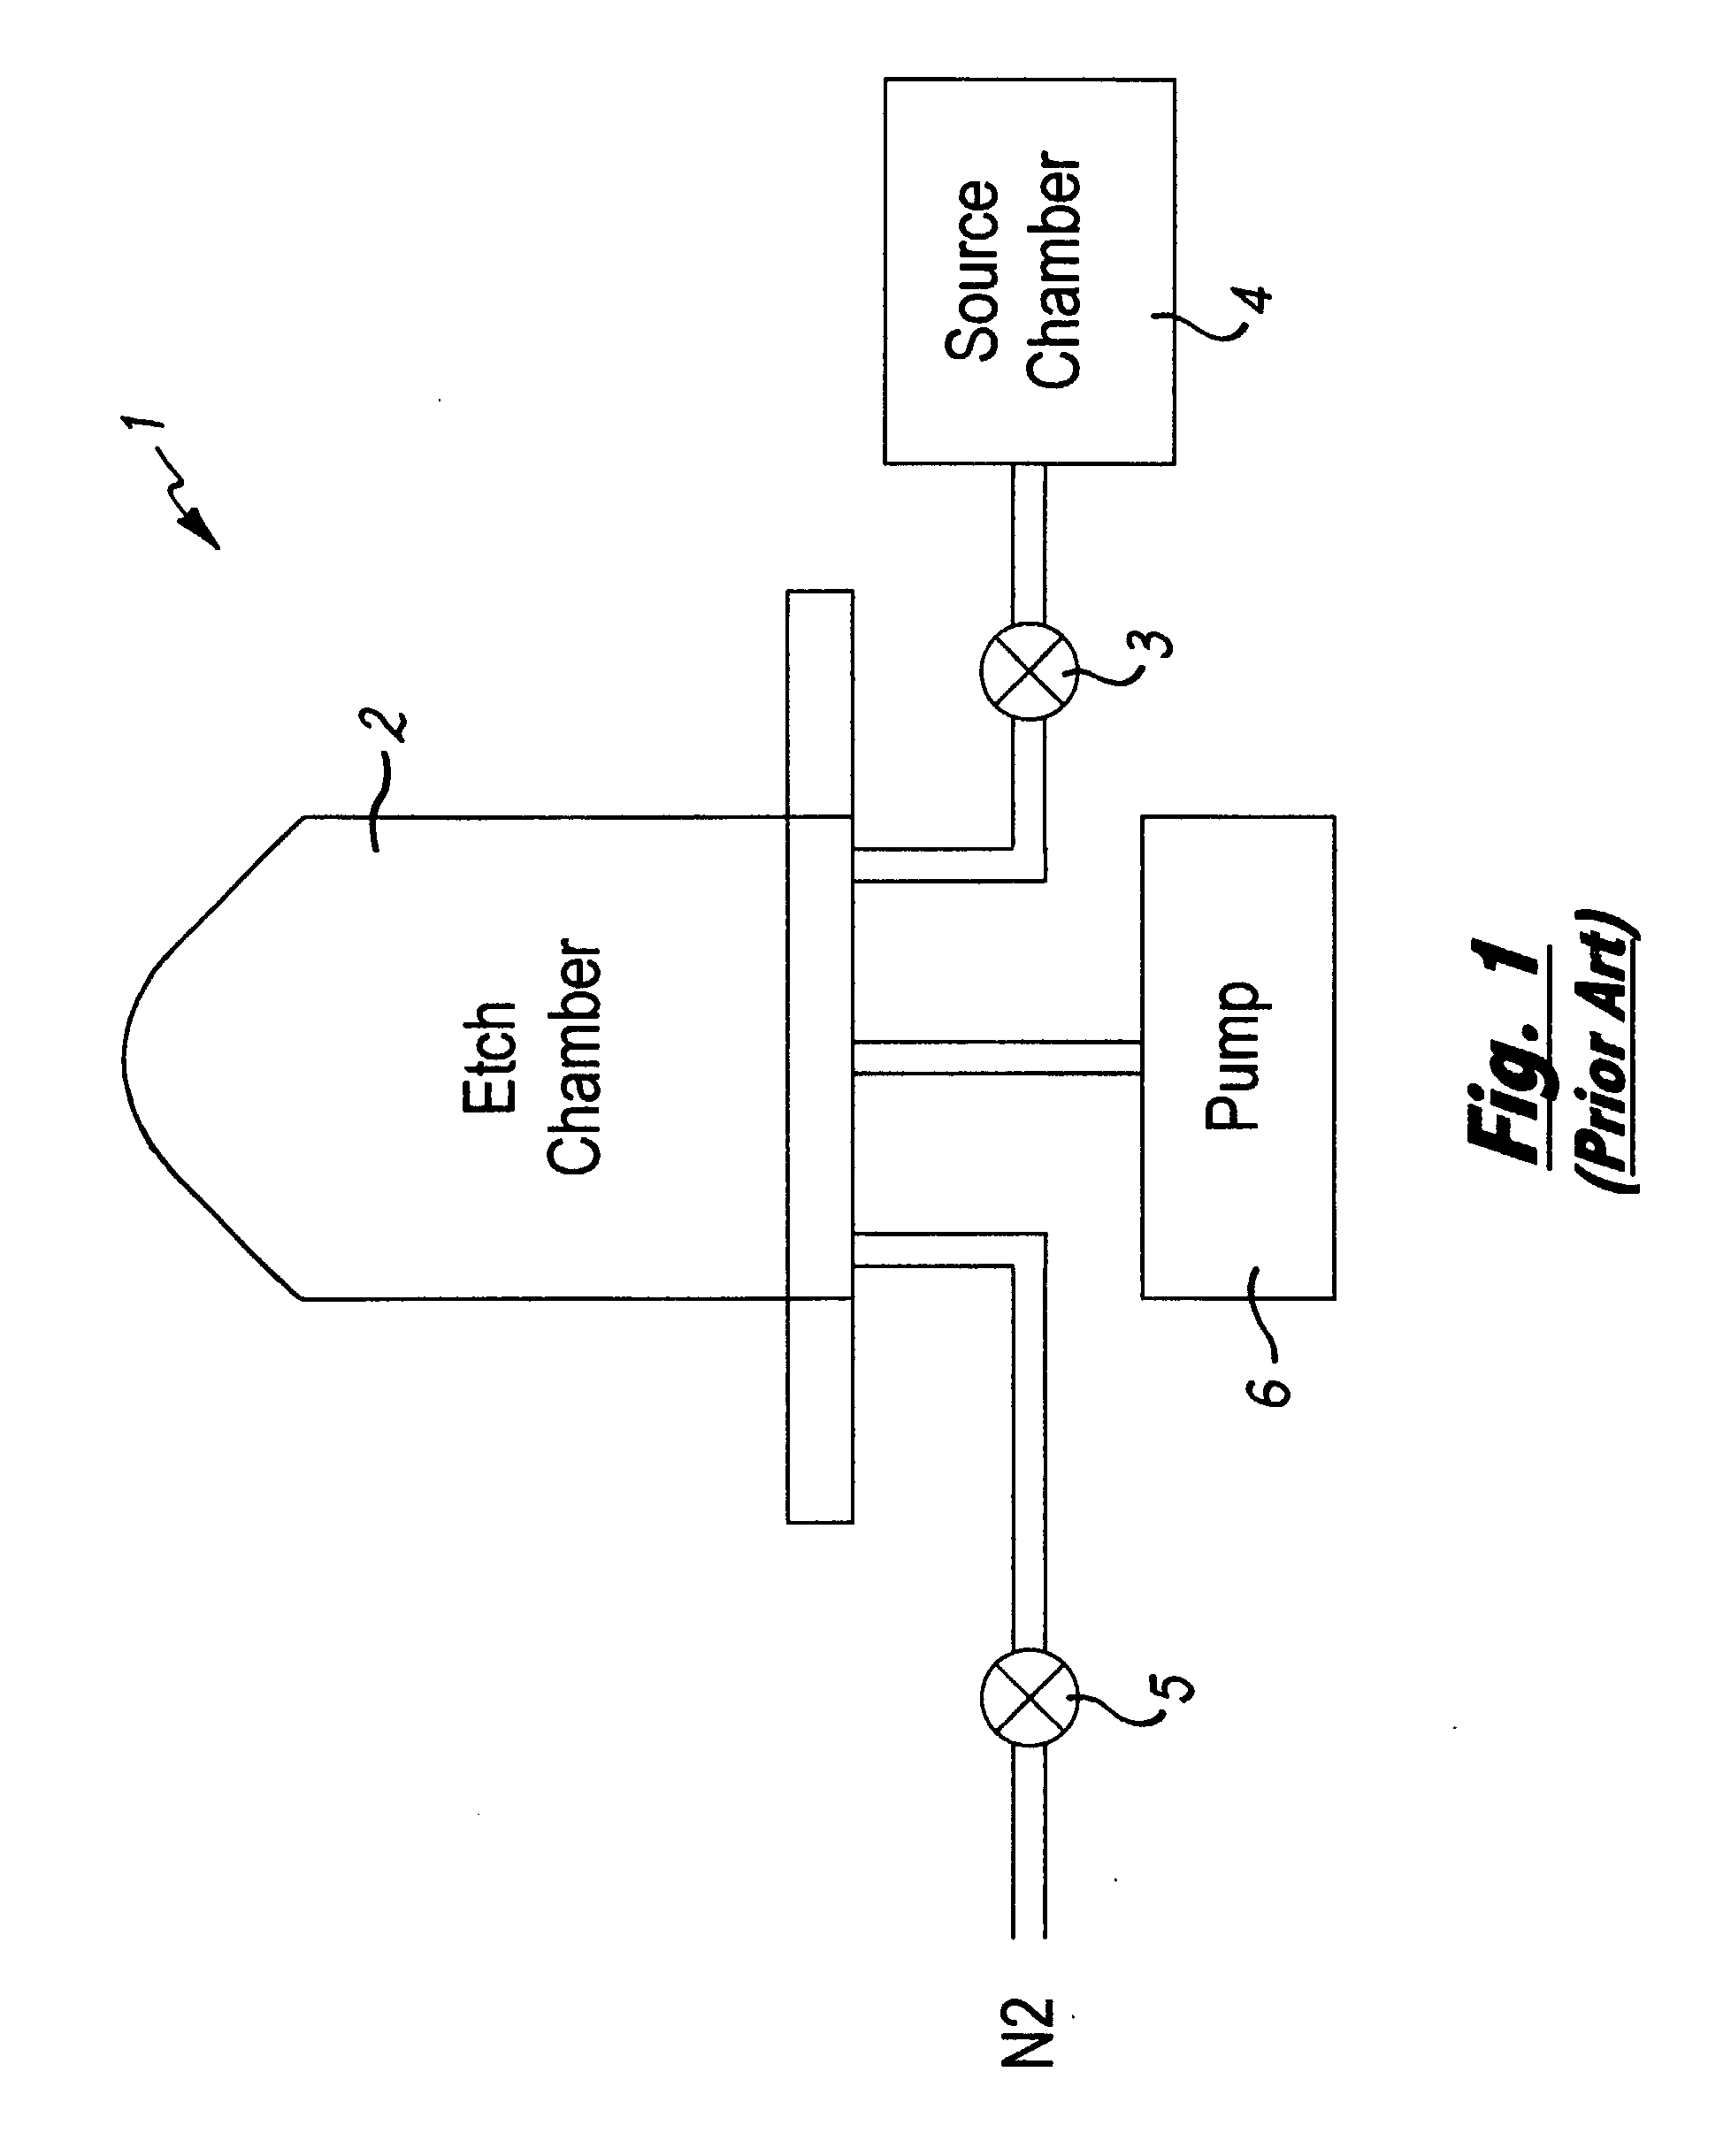 Method and Apparatus for the Etching of Microstructures